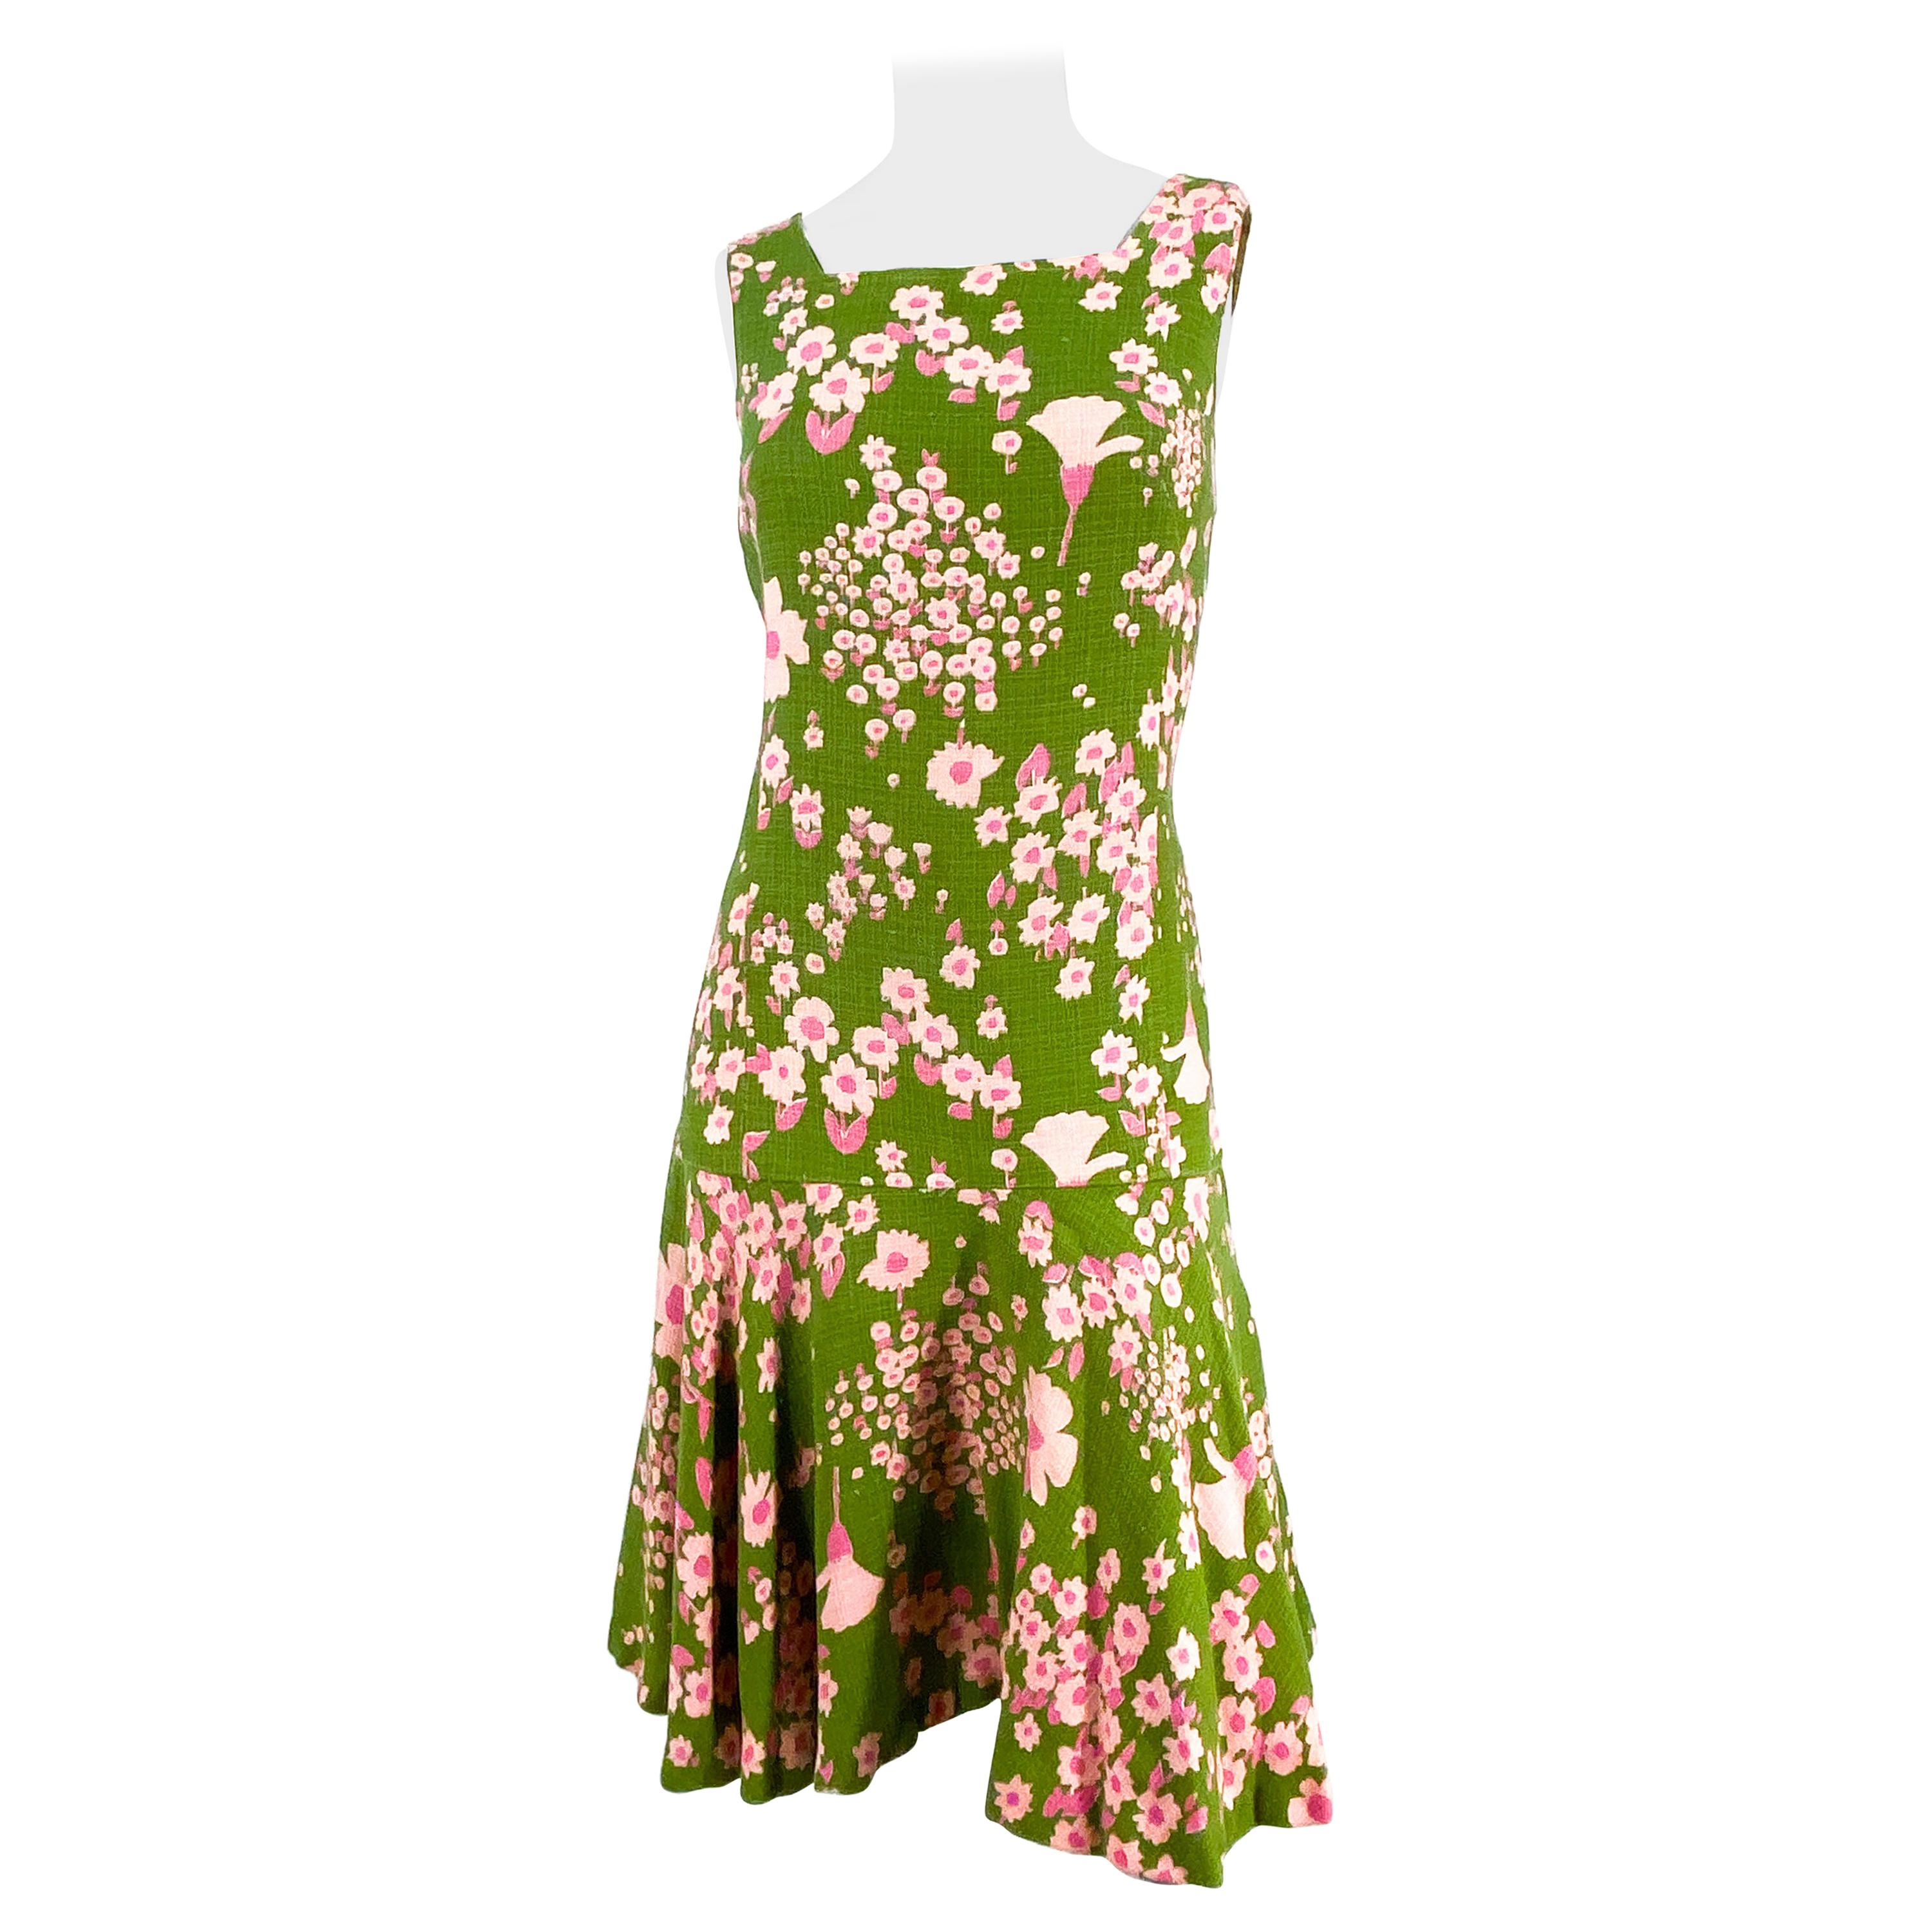 1960s Avocado Green Floral Printed Drop-Waist Day Dress For Sale